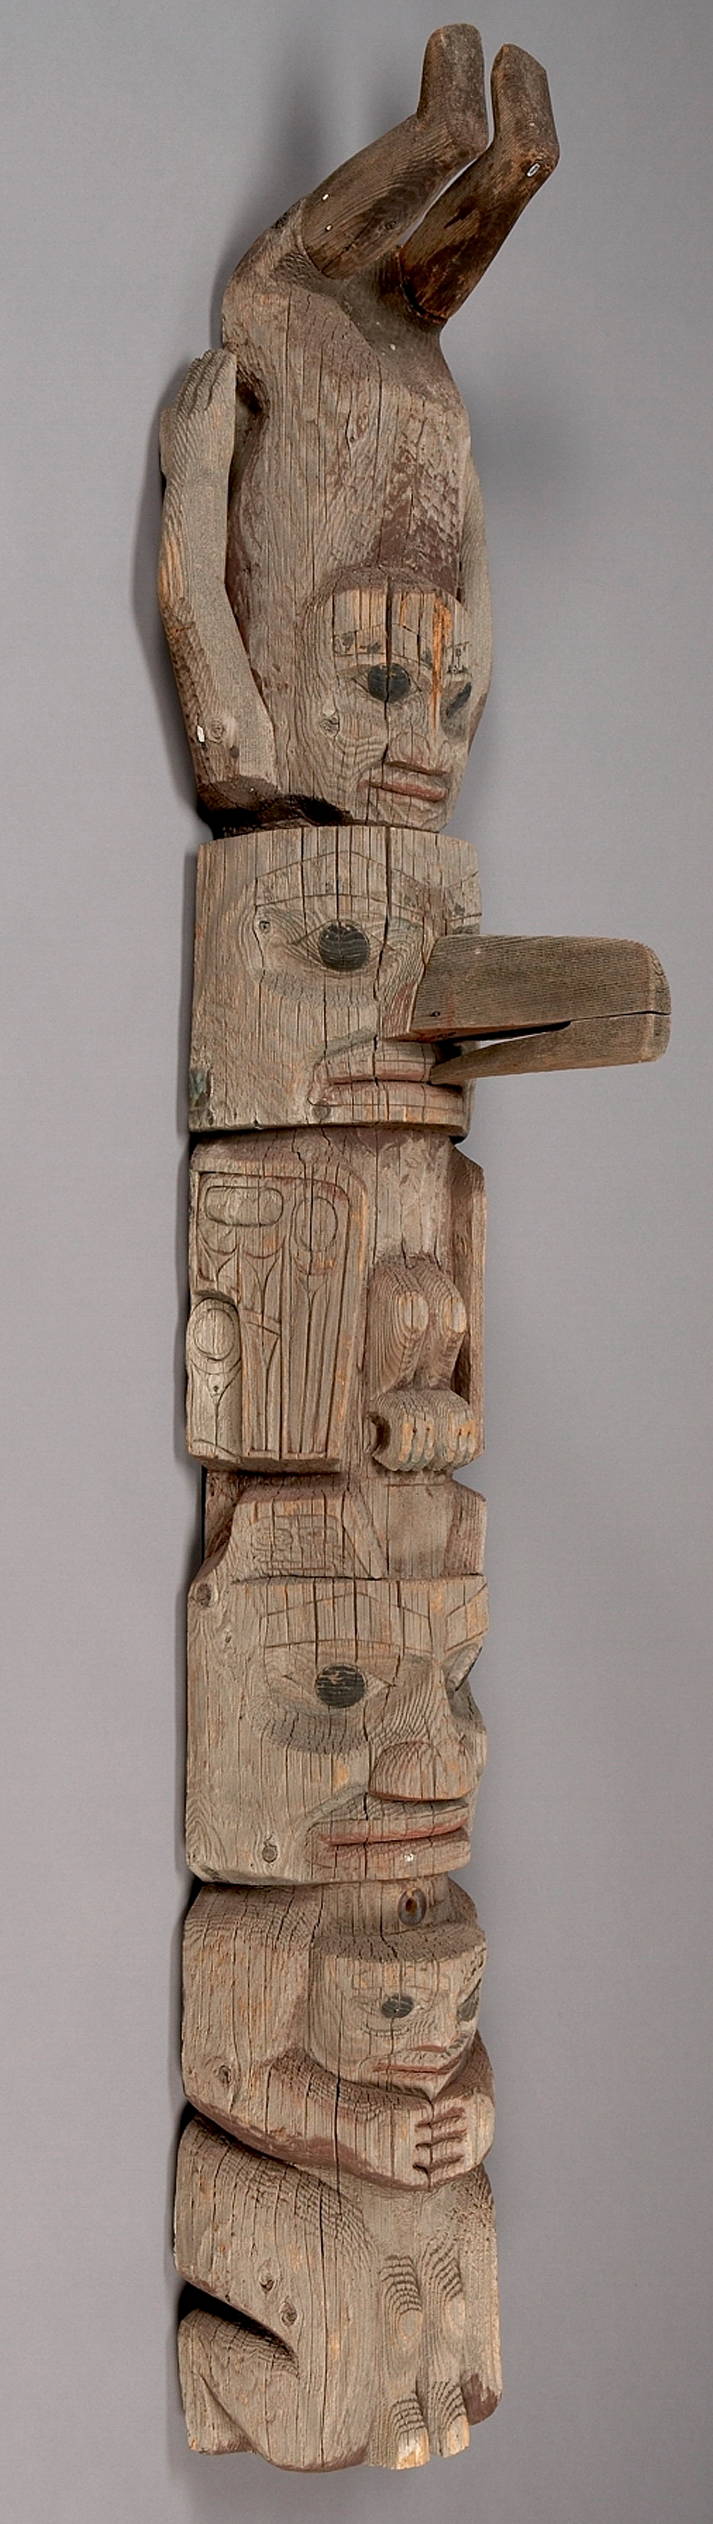 Pacific Northwest Native American Totem Poles